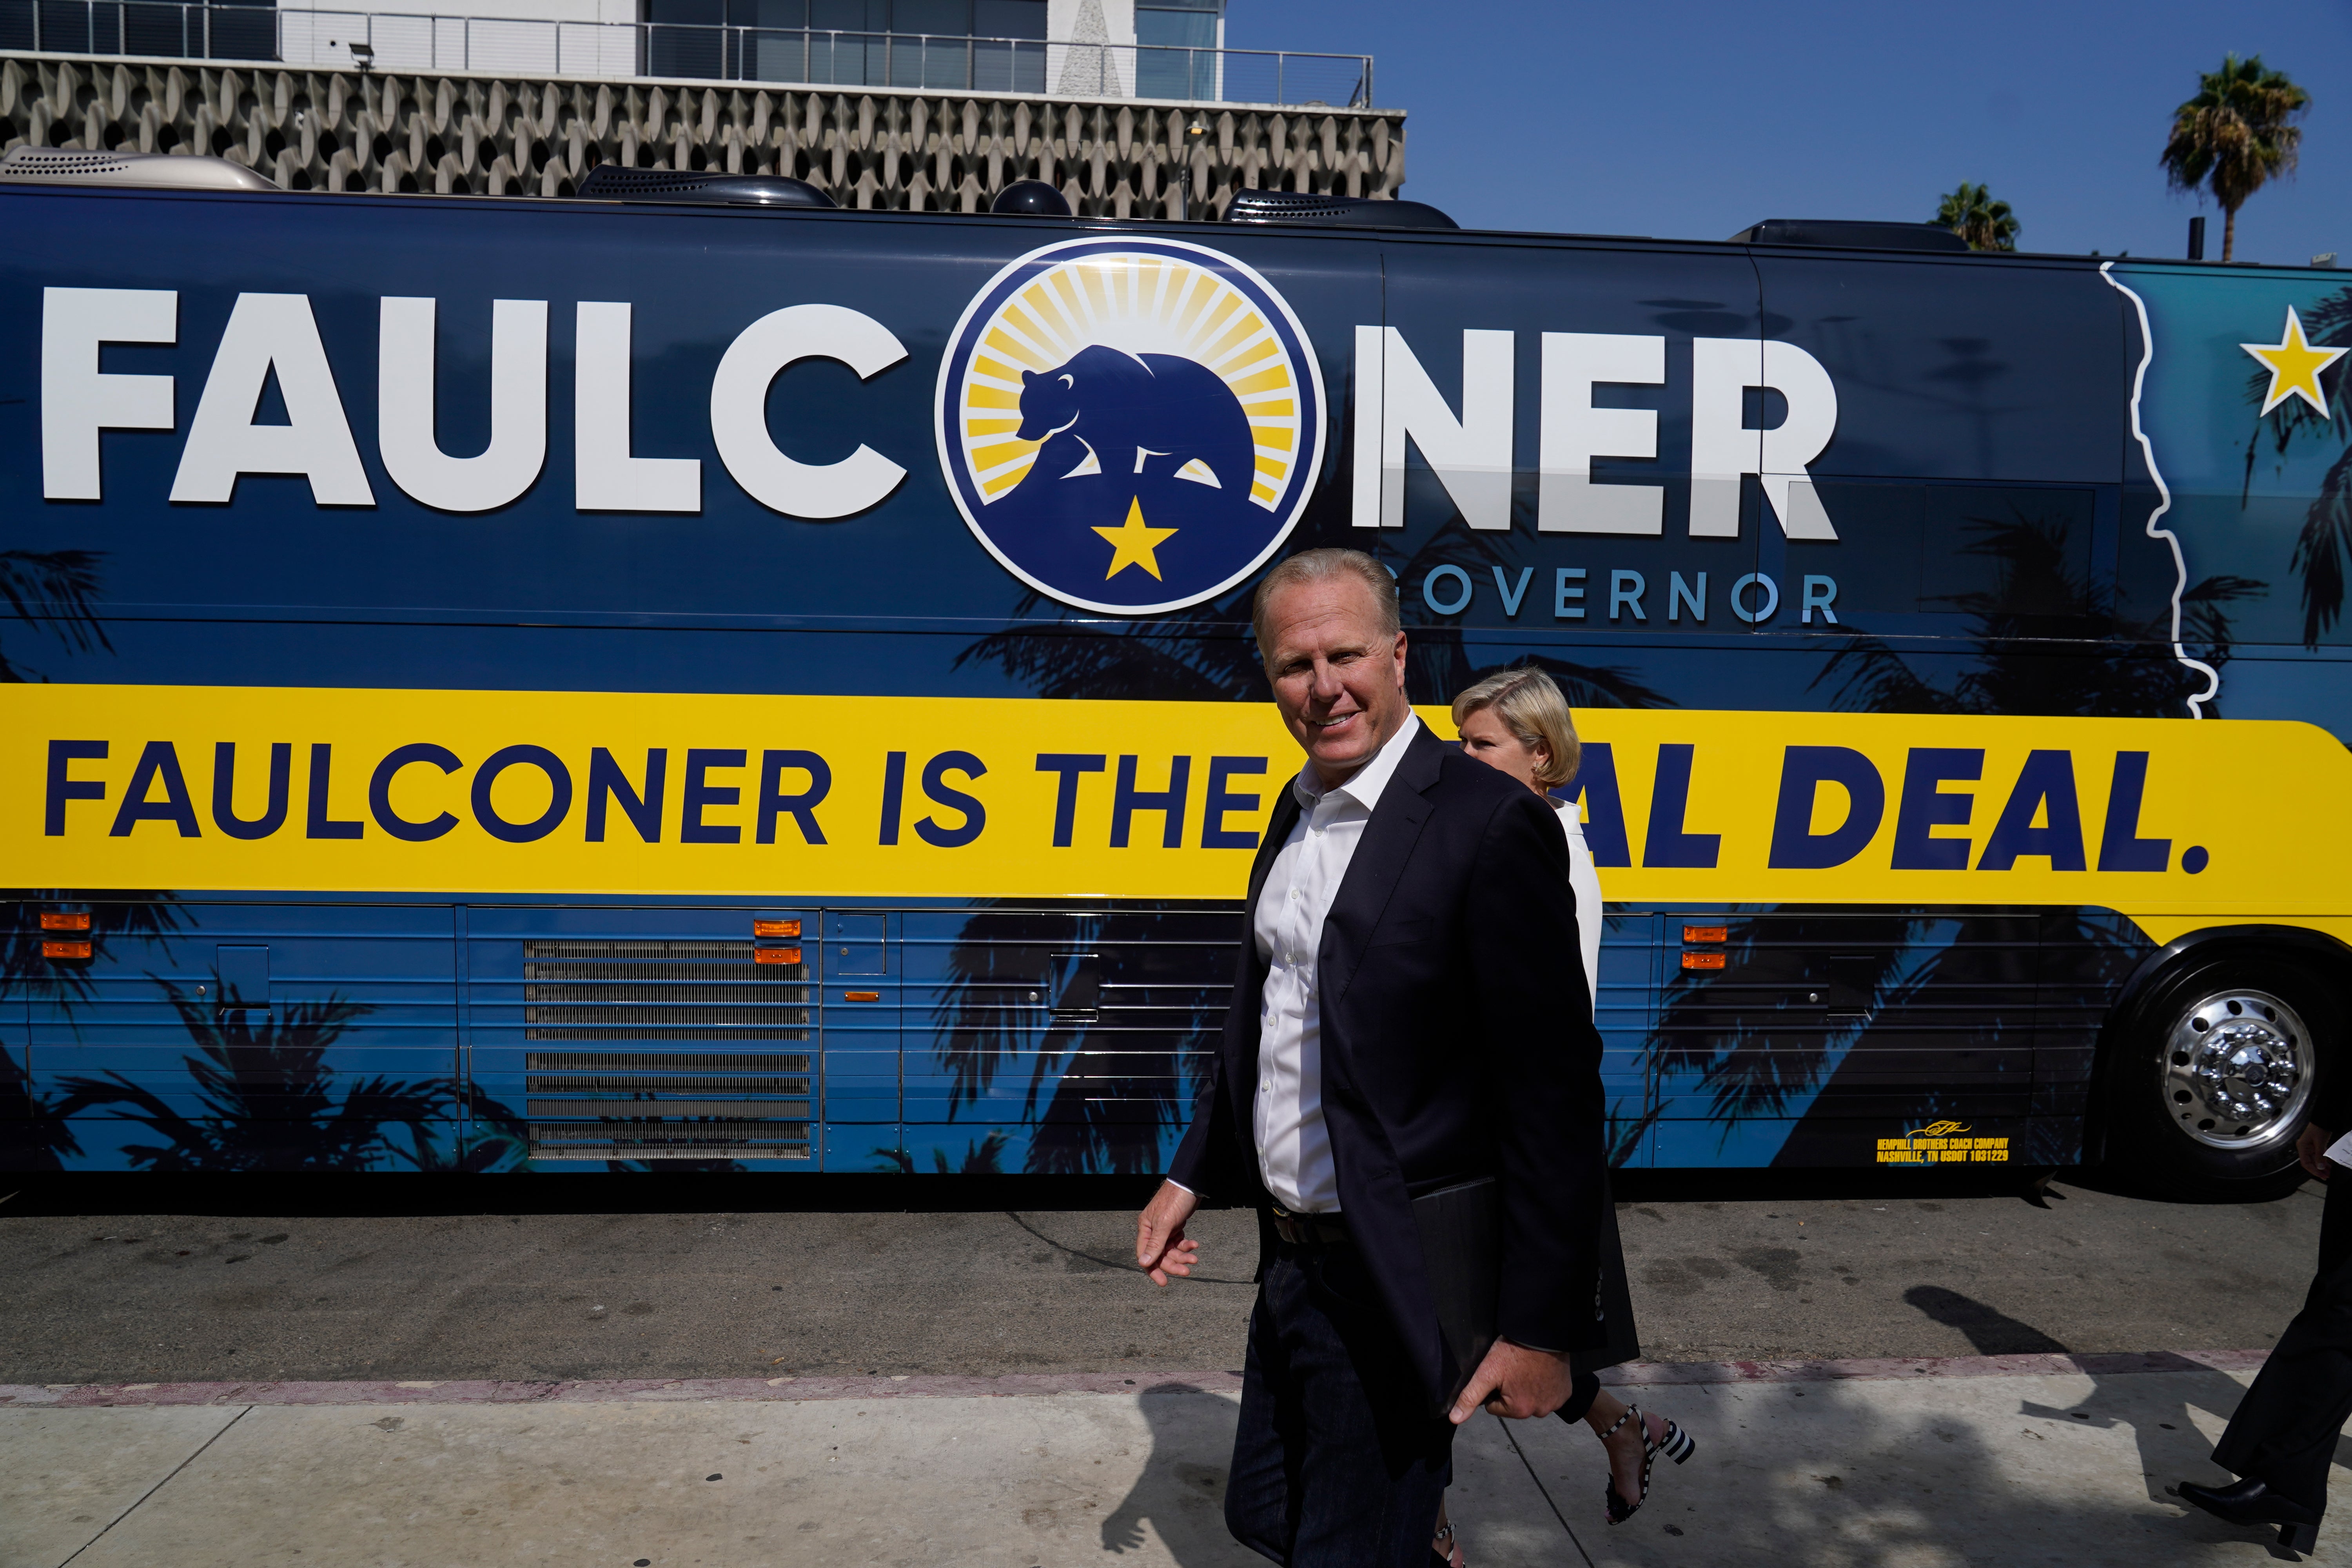 California gubernatorial candidate and former San Diego mayor Kevin Faulconer and his wife, Katherine Faulconer, arrive on a charter bus at a campaign stop to promote his "women's empowerment plan" at MacArthur Park in Los Angeles Monday, Aug. 30, 2021. The Republican is among 46 candidates seeking to replace Democratic Gov. Gavin Newsom in the Sept. 14 recall election. (AP Photo/Damian Dovarganes)